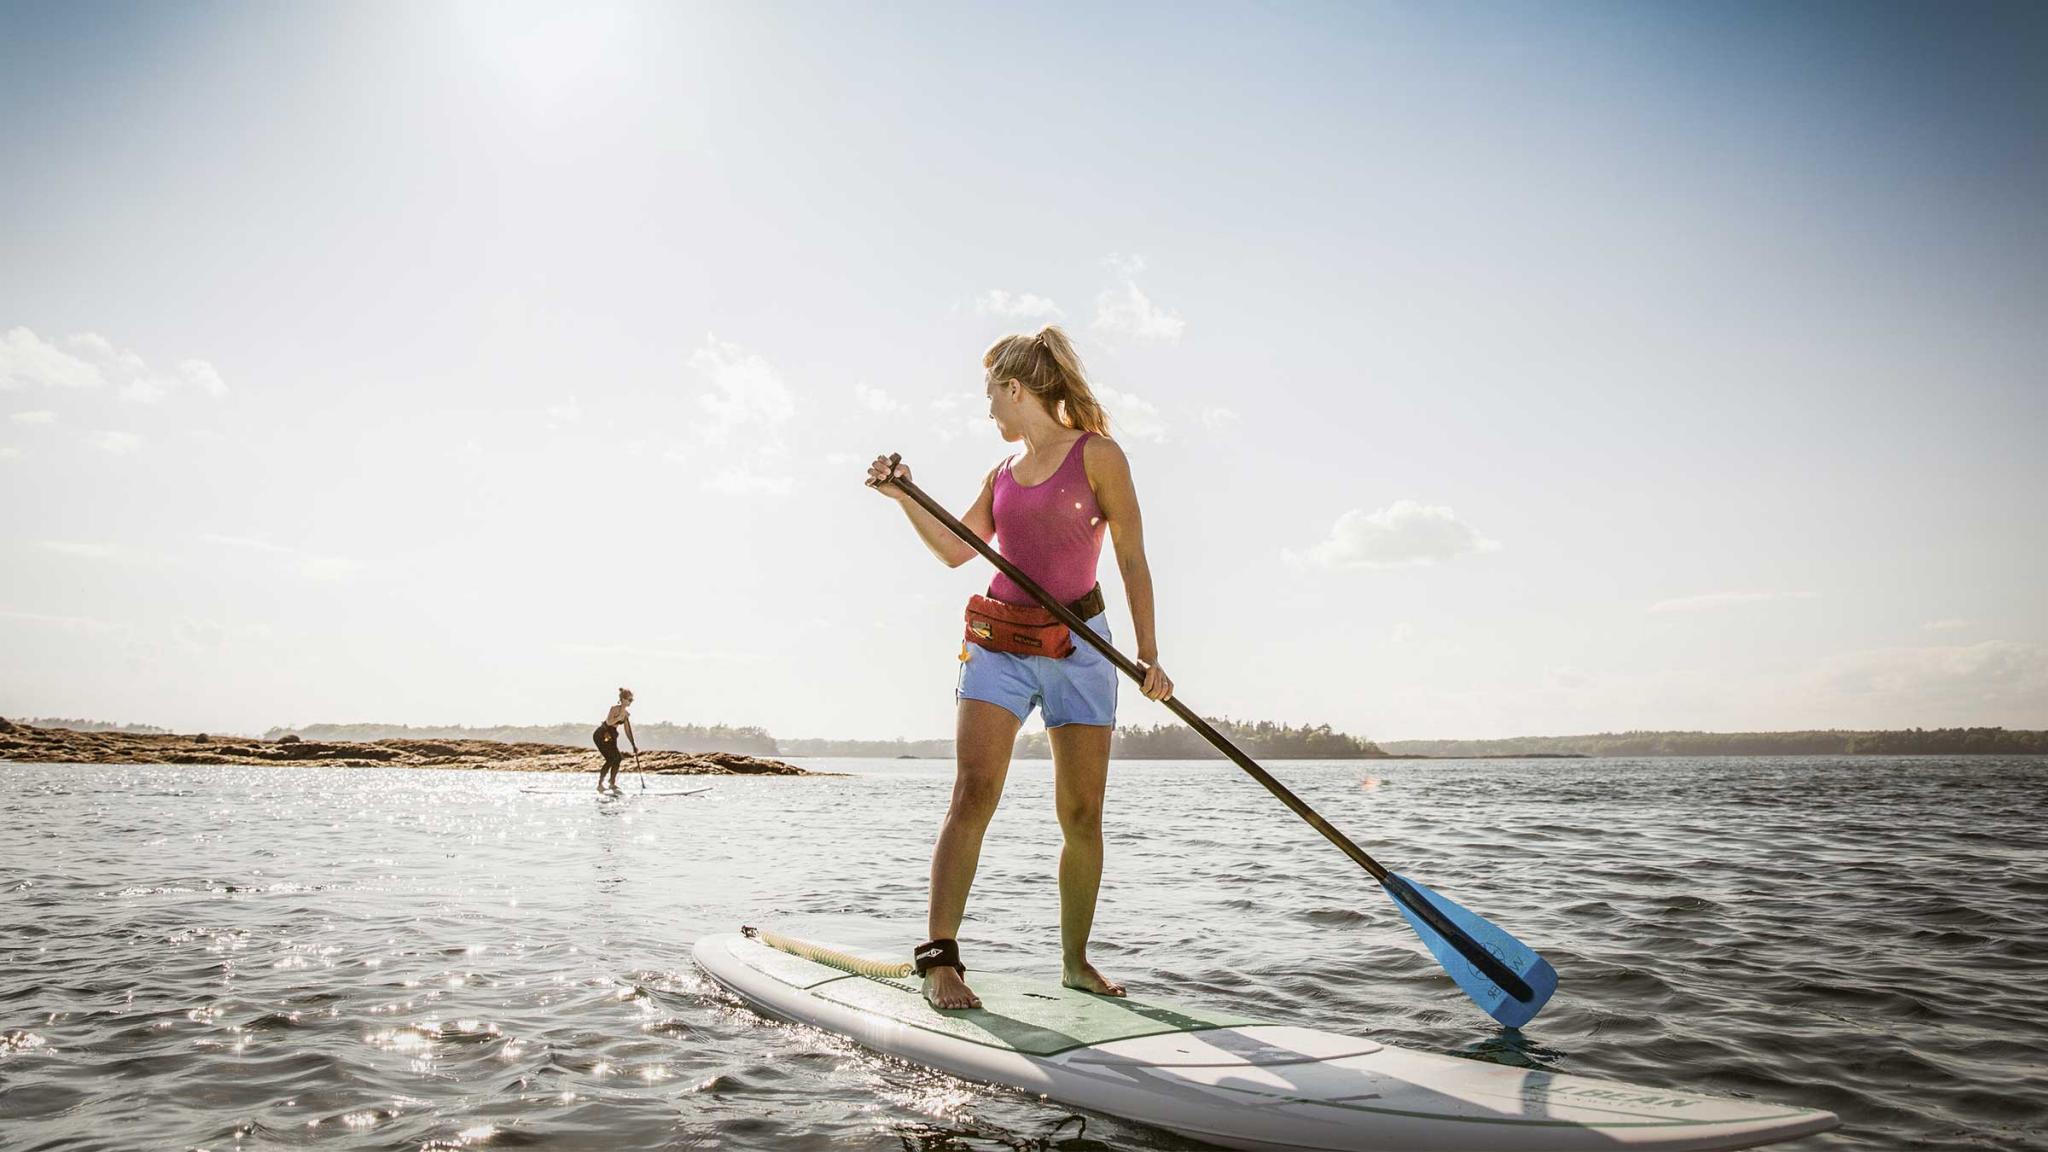 Maine Stand Up Paddle Boarding Vacation Resorts with SUP / Kayaking